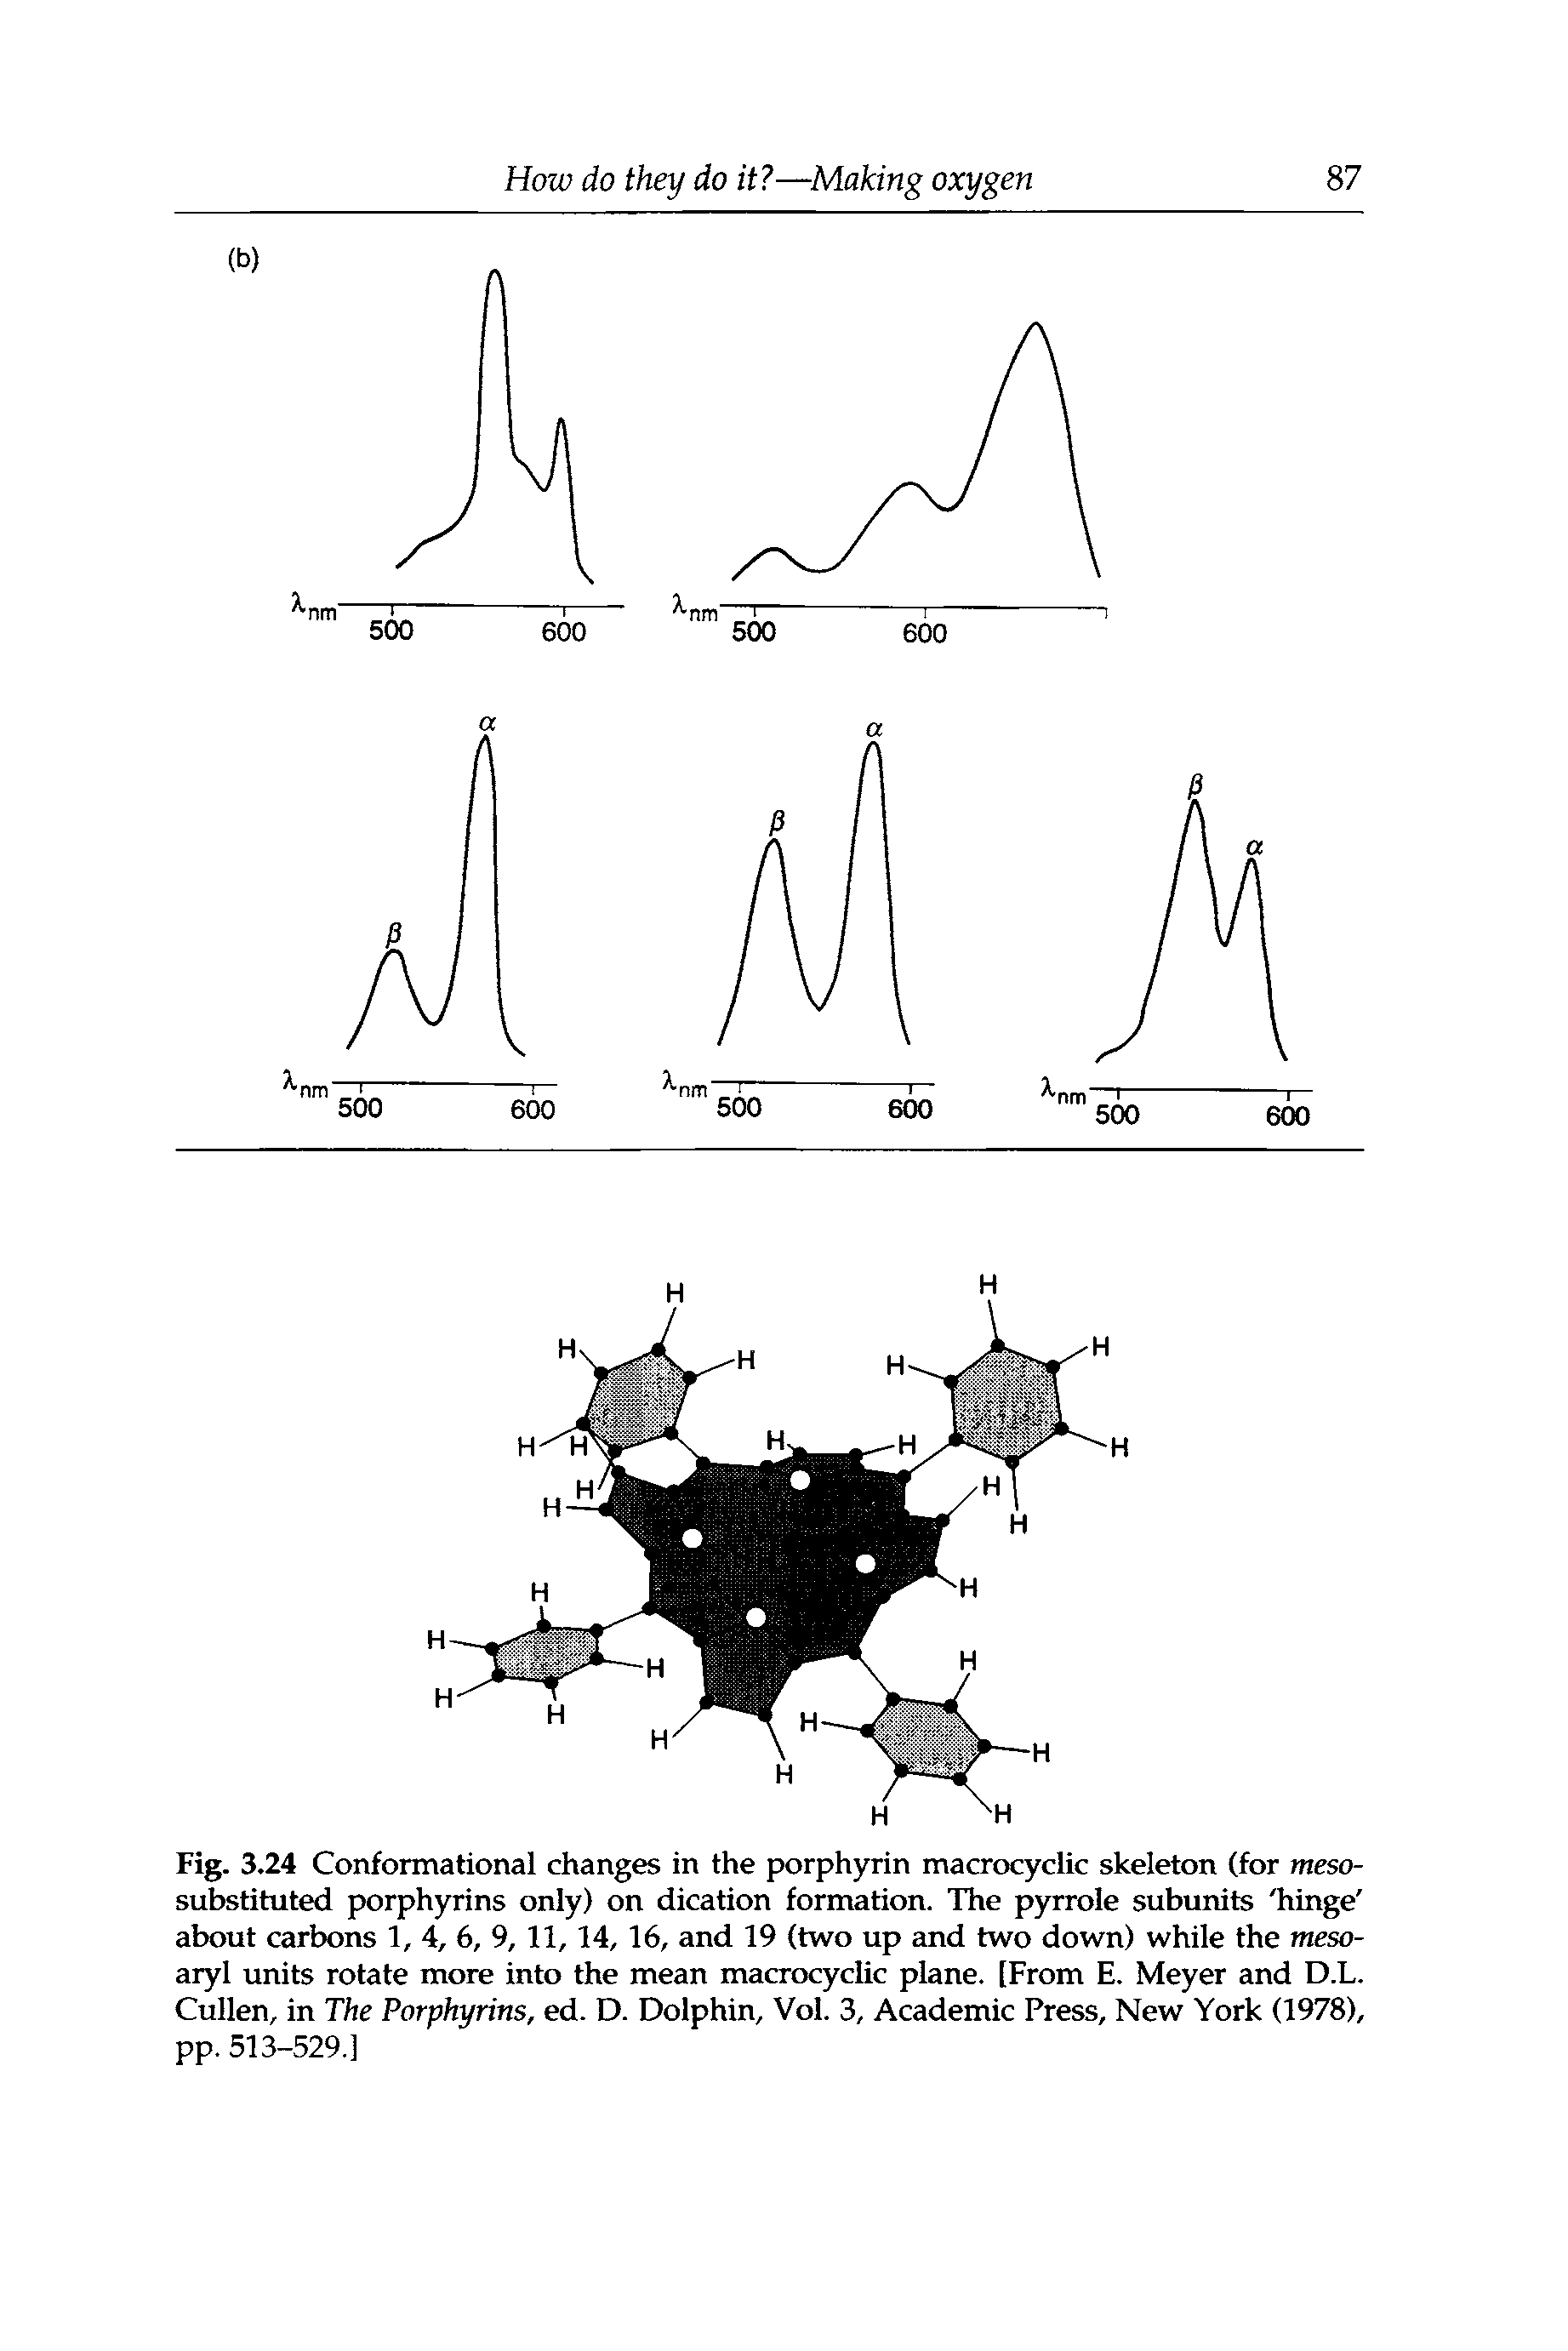 Fig. 3.24 Conformational changes in the porphyrin macrocyclic skeleton (for meso-substituted porphyrins only) on dication formation. The pyrrole subunits hinge about carbons 1, 4, 6, 9,11,14,16, and 19 (two up and two down) while the meso-aryl imits rotate more into the mean macrocyclic plane. [From E. Meyer and D.L. Cullen, in The Porphyrins, ed. D. Dolphin, Vol. 3, Academic Press, New York (1978), pp. 513-529.]...